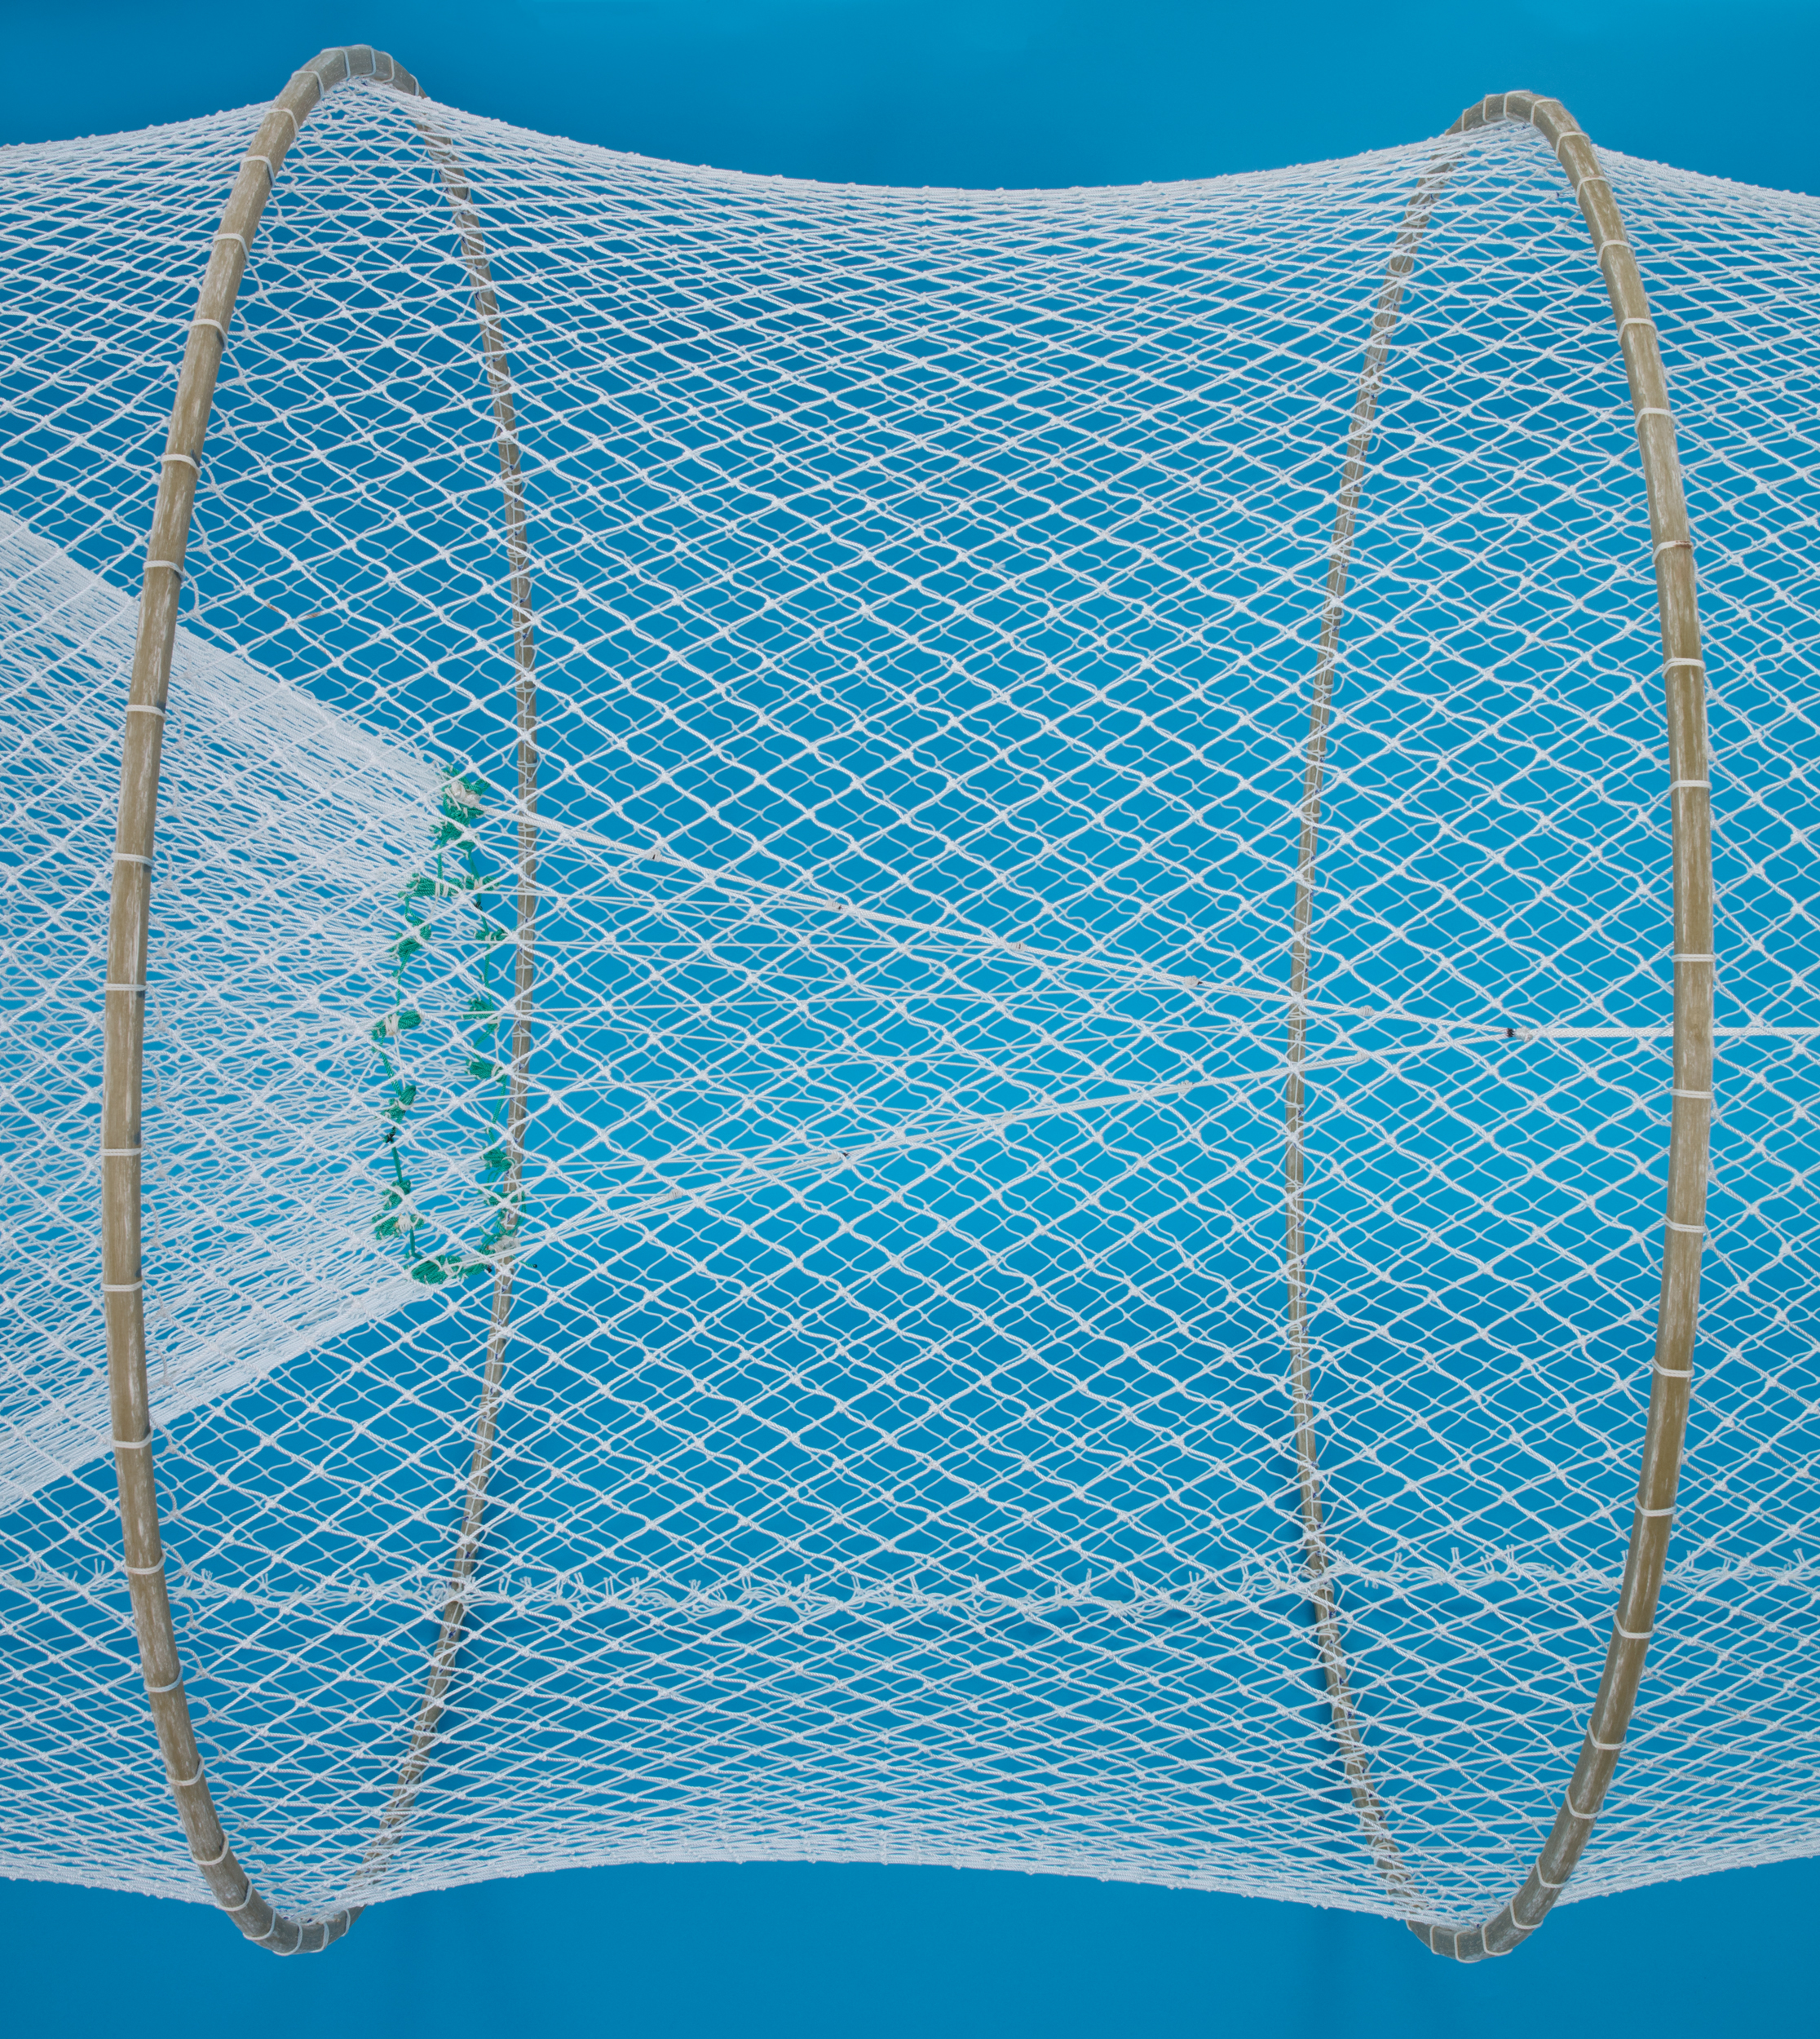 Knotless Hoop Nets - US Made - Duluth Fish Nets by H. Christiansen